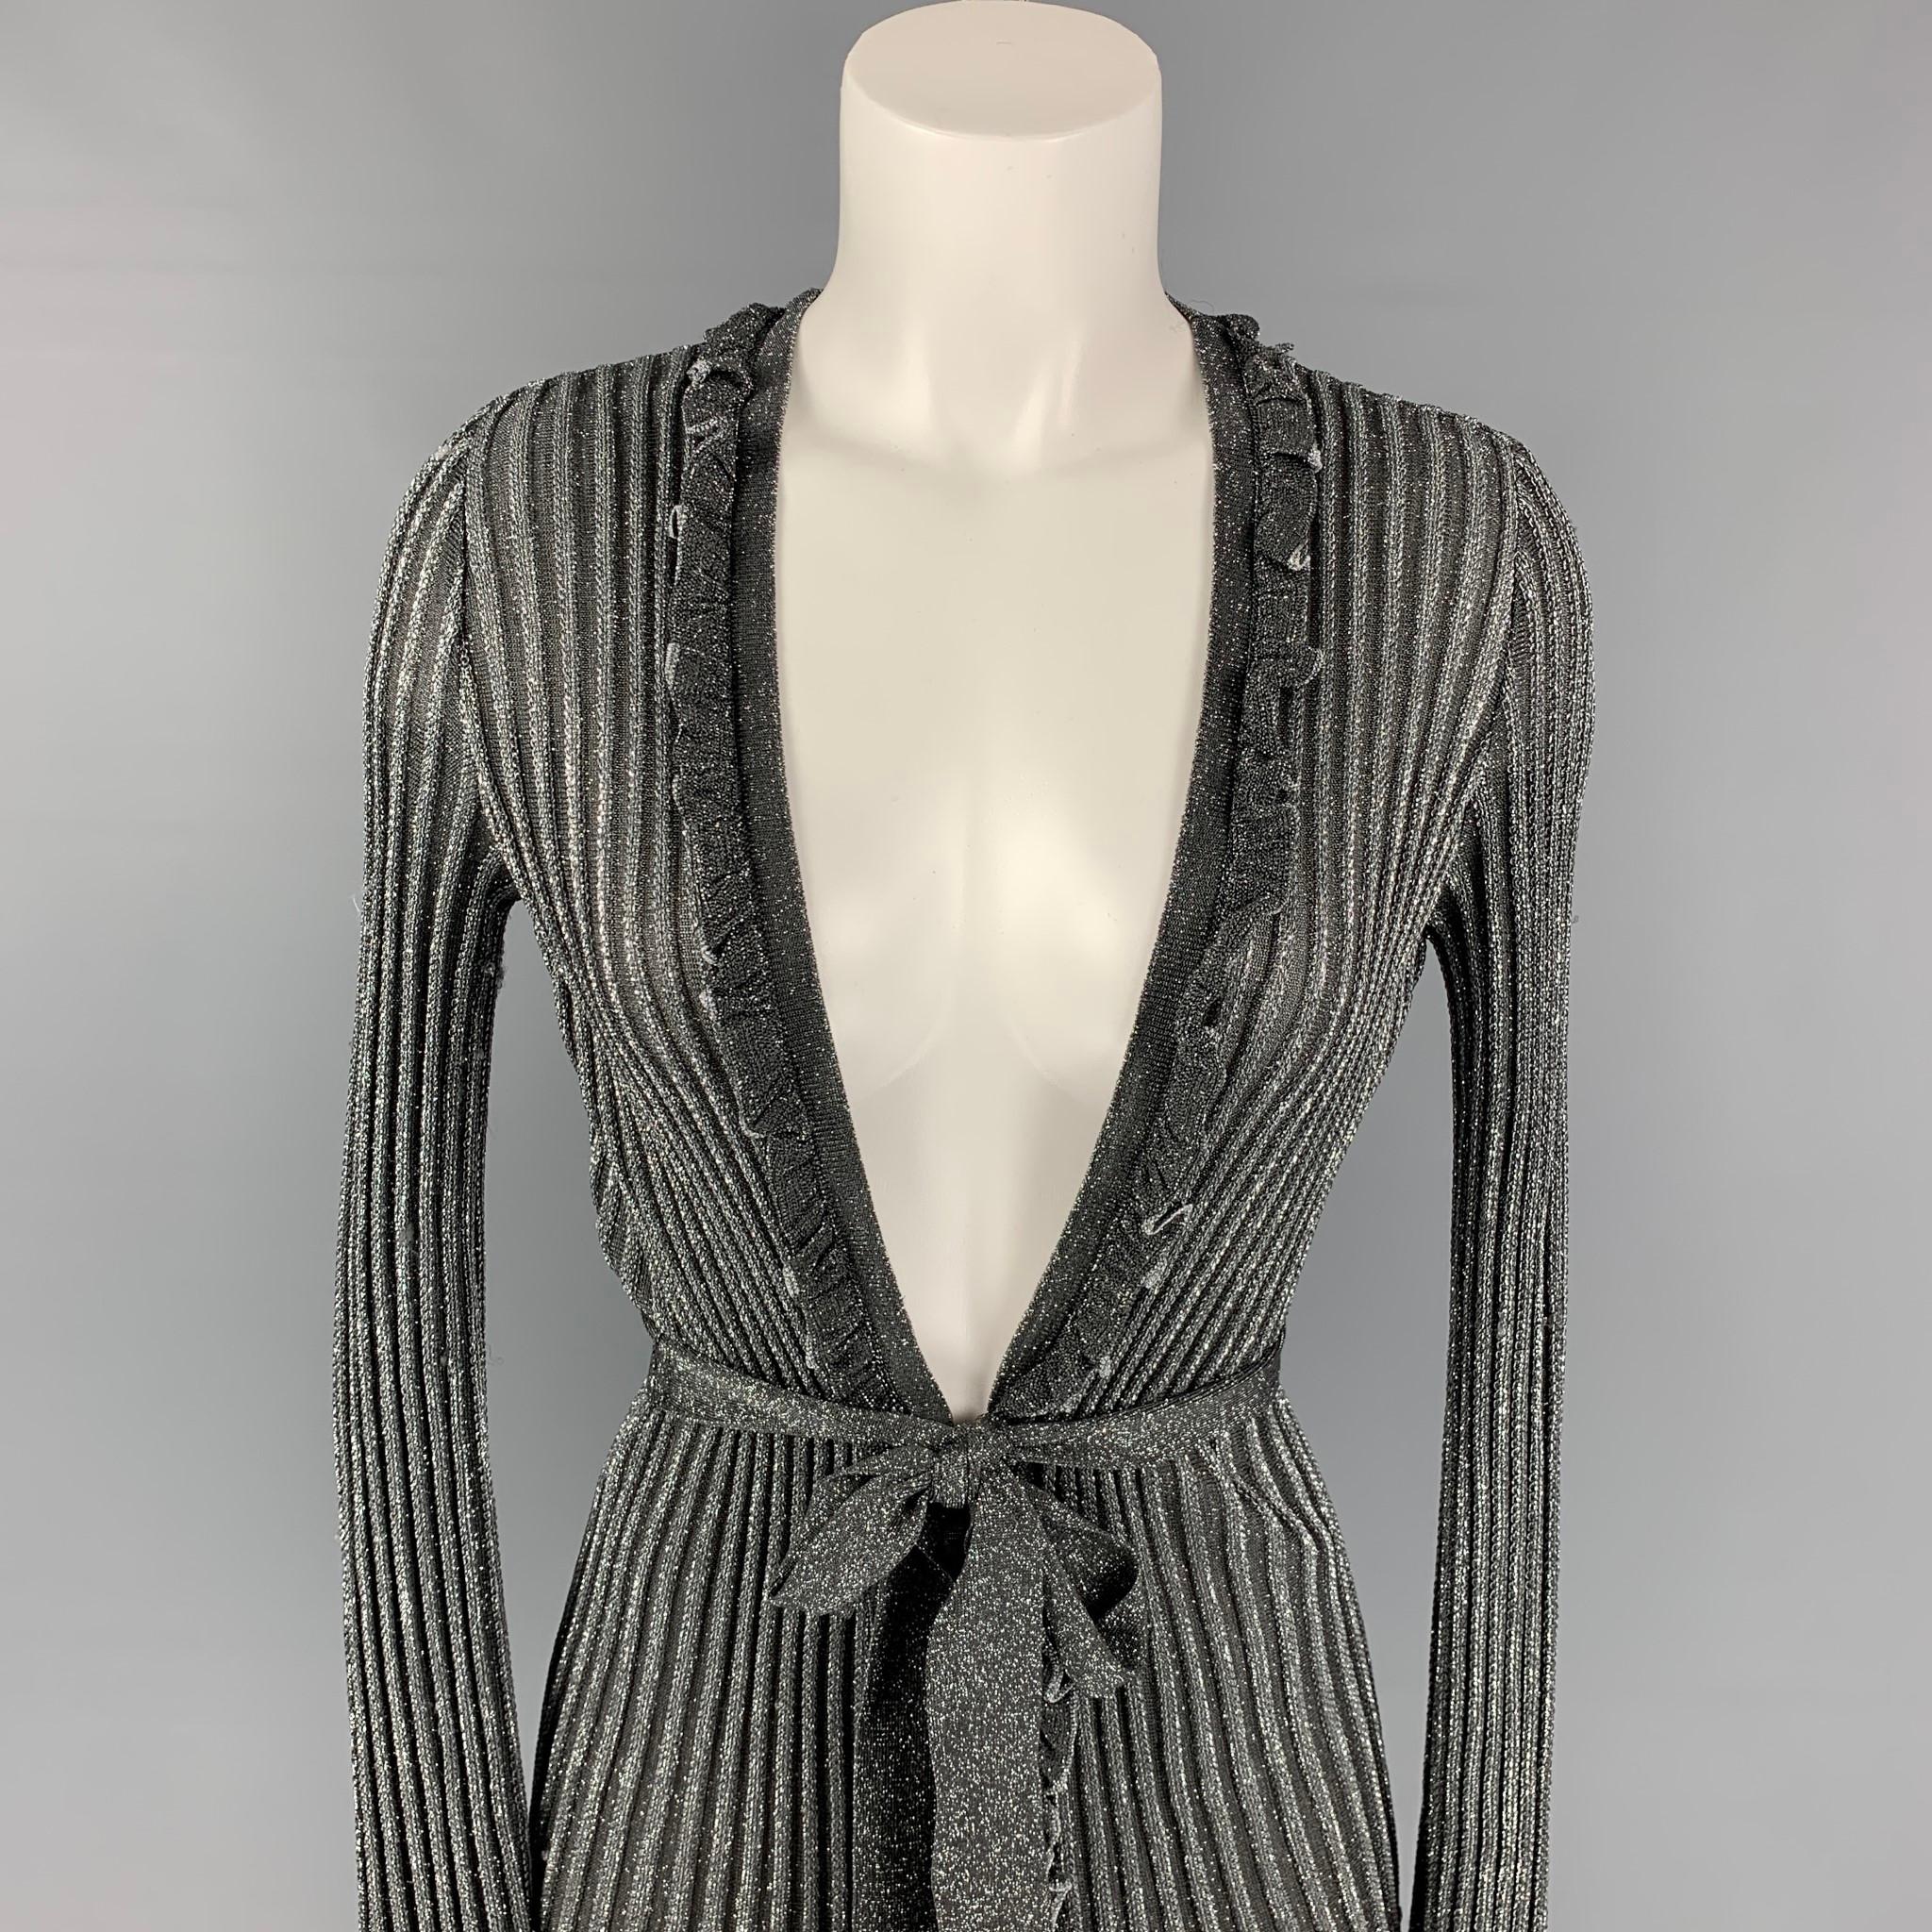 M MISSONI cardigan comes in a silver & black metallic featuring a ruffled trim and a belted style. Made in Italy. 

Very Good Pre-Owned Condition.
Marked:  I 40 / D 34 / A 34 / EFB 36 / GB 8 / USA 4

Measurements:

Shoulder: 14.5 in.
Bust: 30